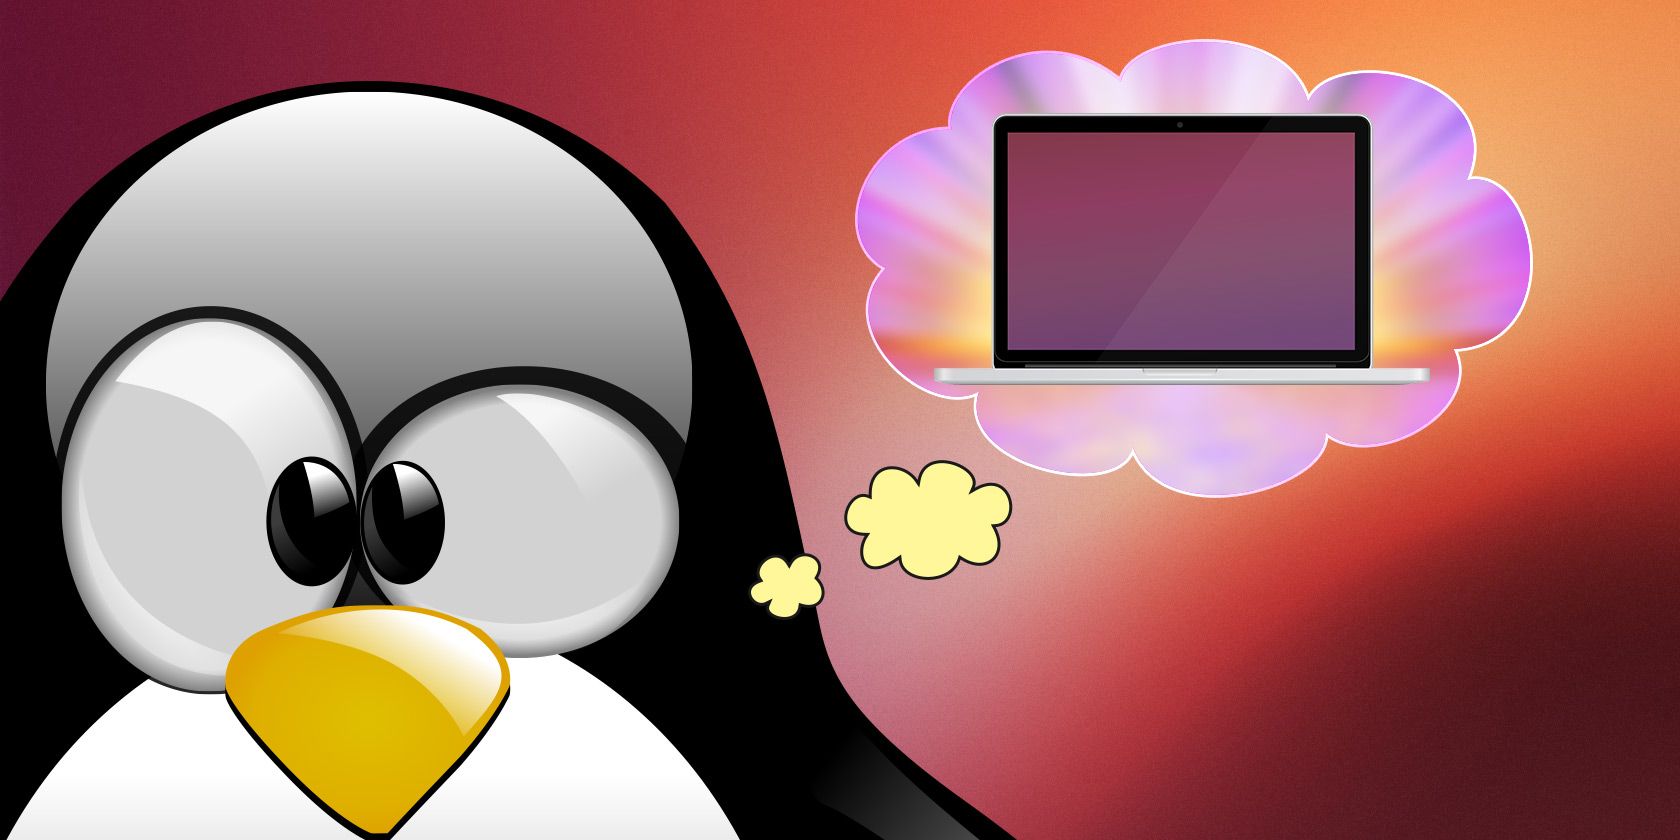 How to Choose the Best Laptop to Install Linux